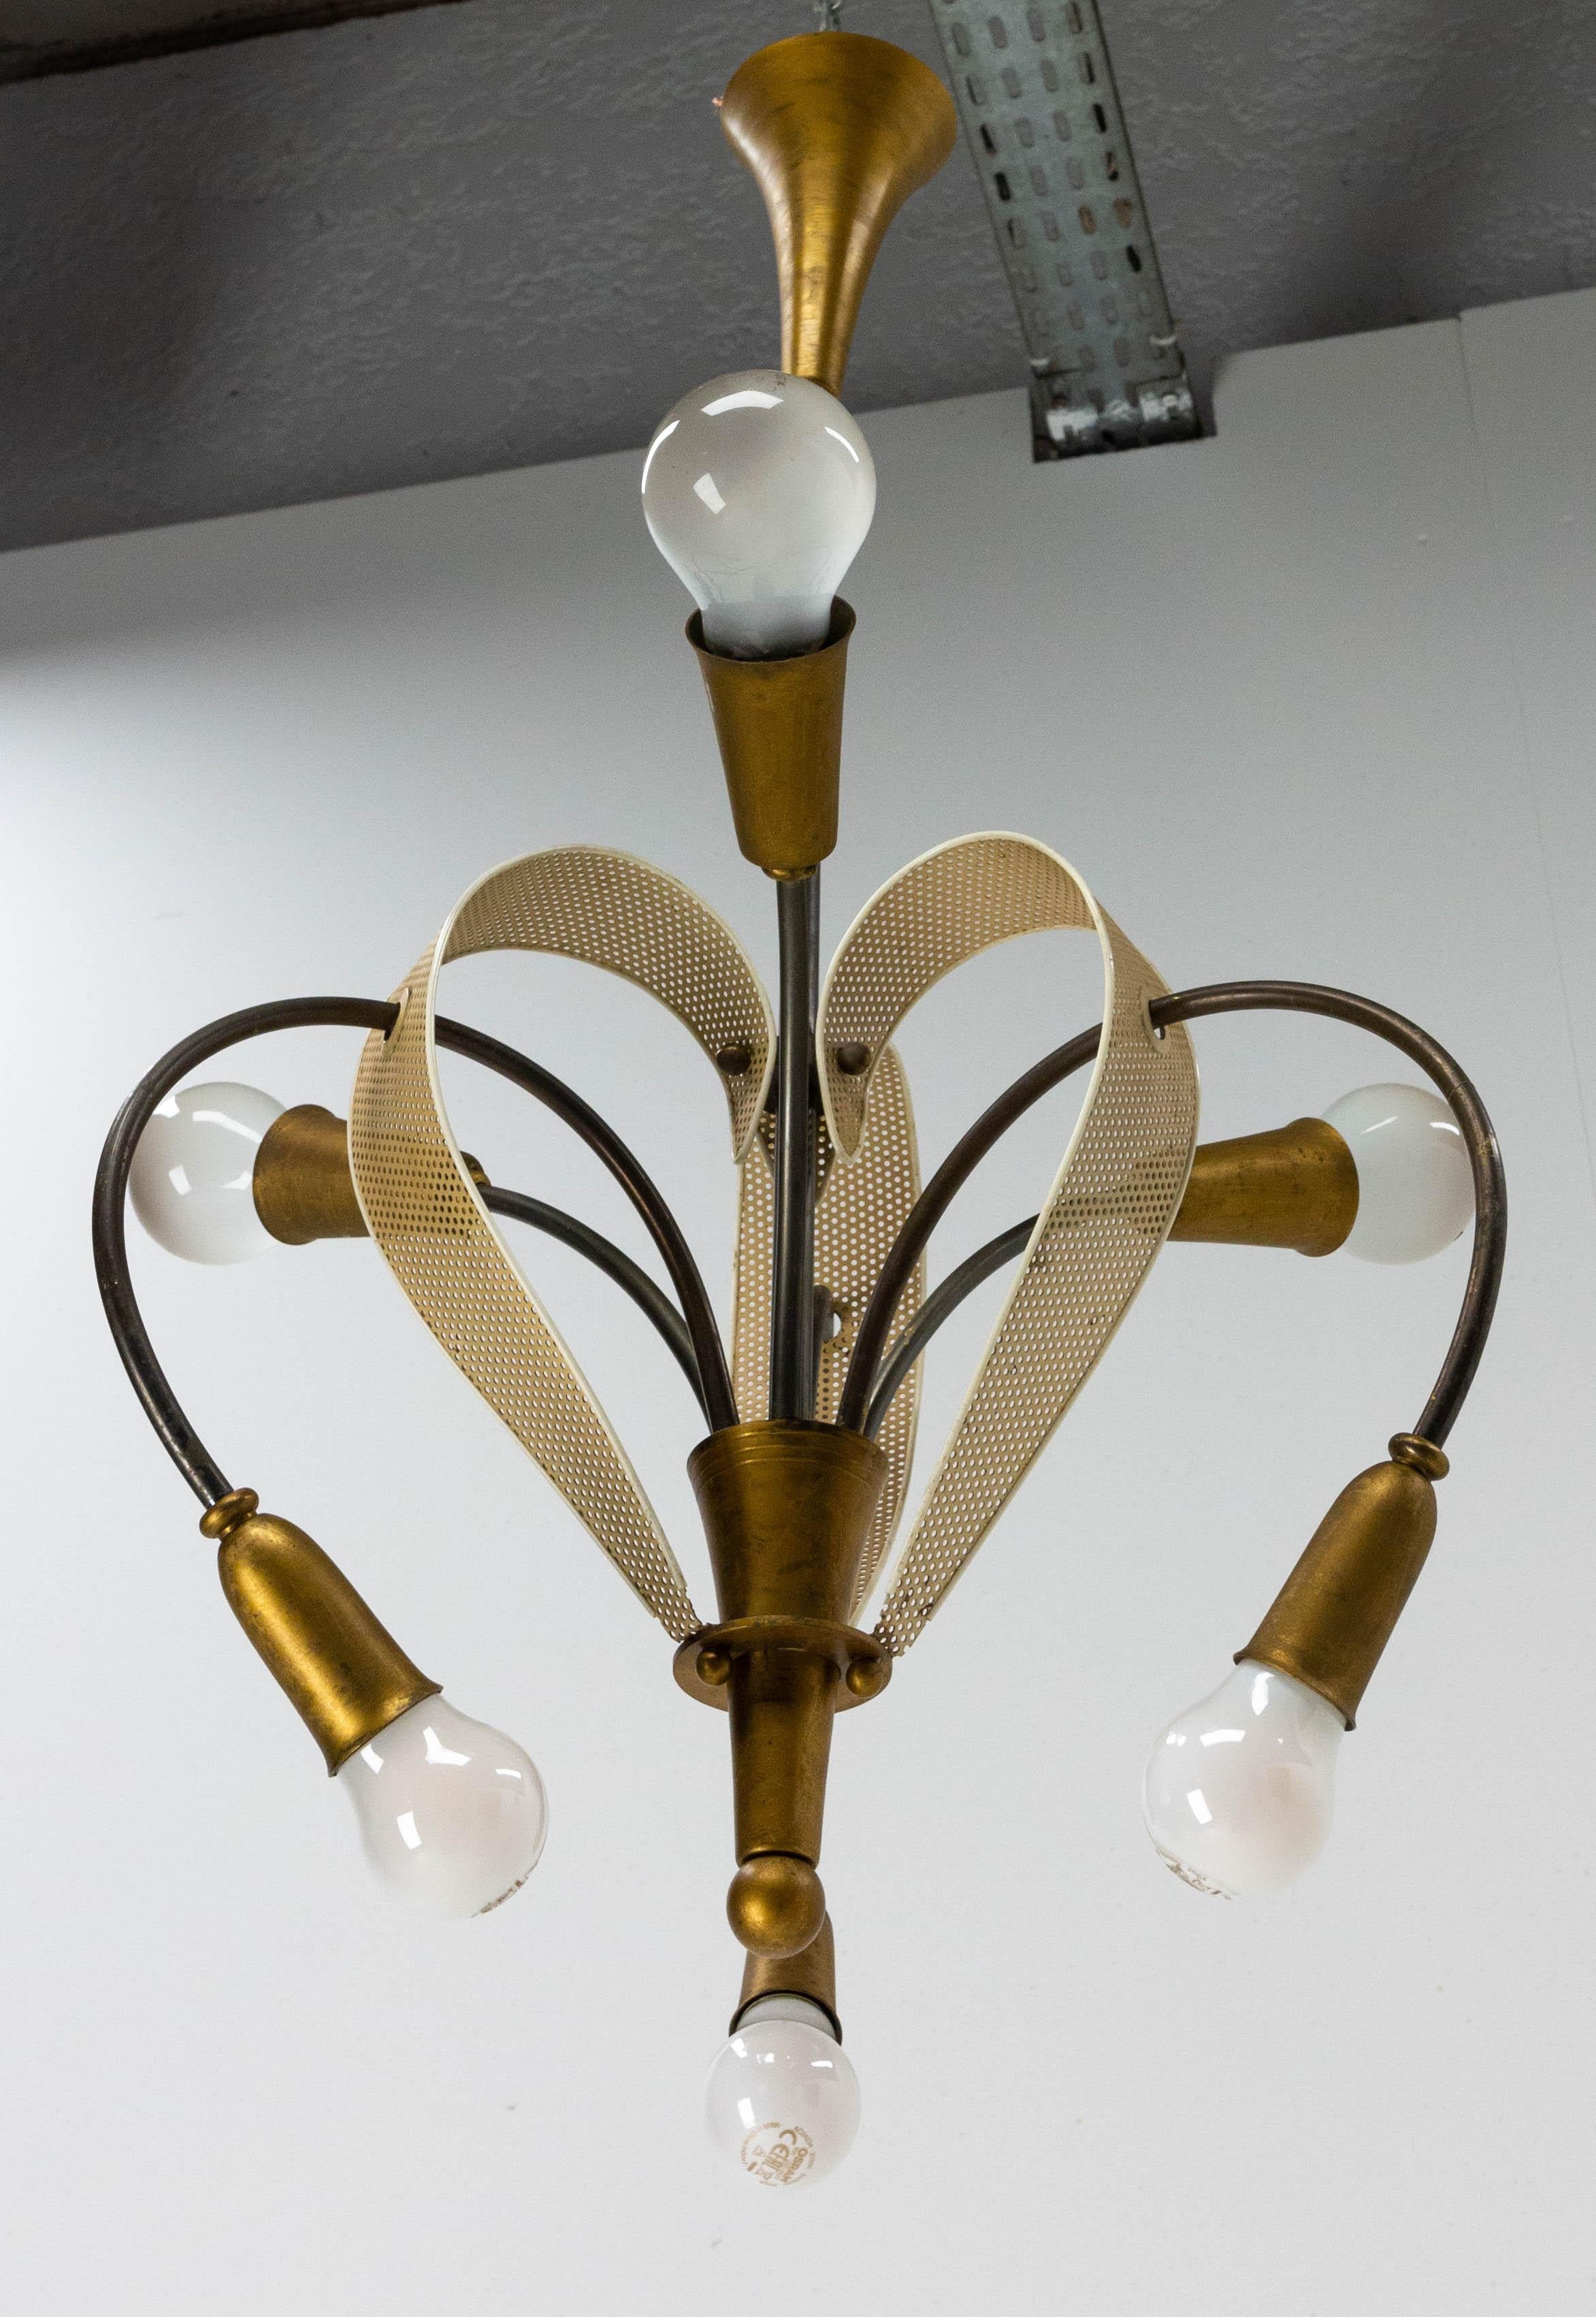 French Chandelier Ceiling Pendant Lustre c. 1950 by Pierre Guariche for Disderot In Good Condition For Sale In Labrit, Landes